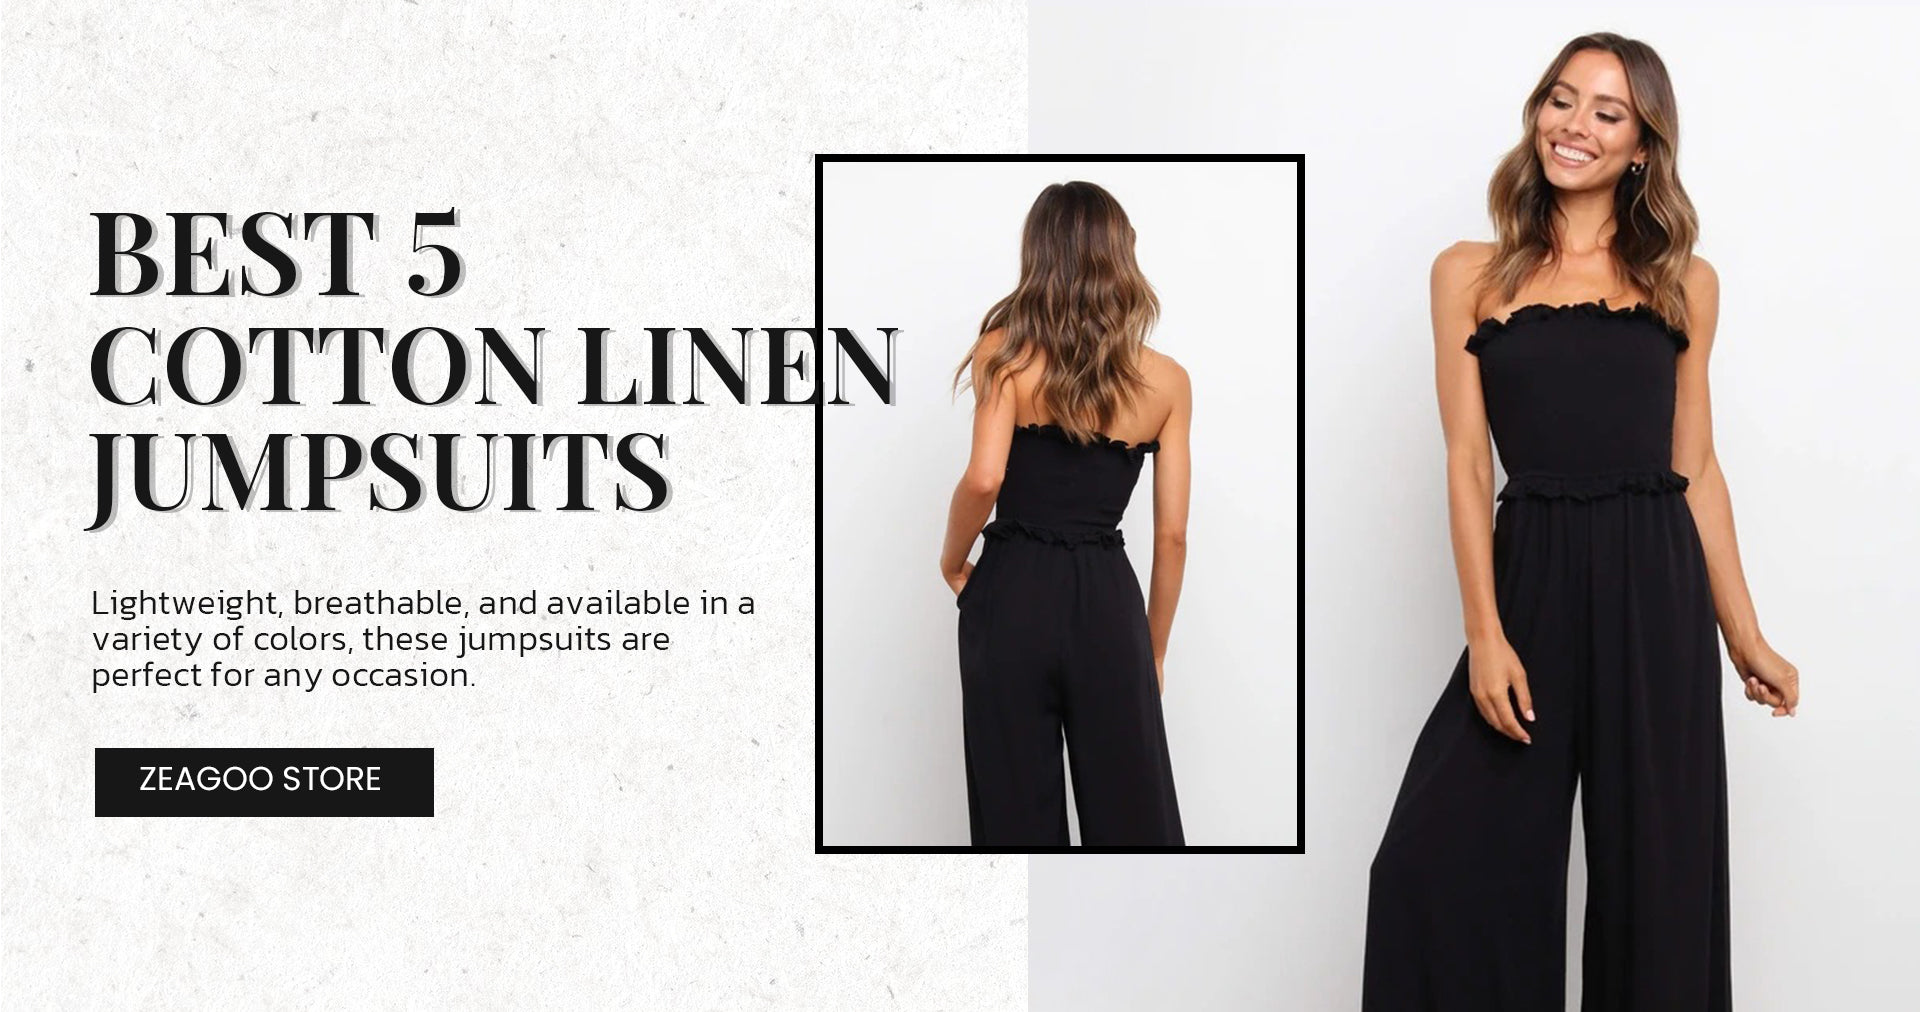 Best 5 Cotton Linen Jumpsuits for Any Occasion